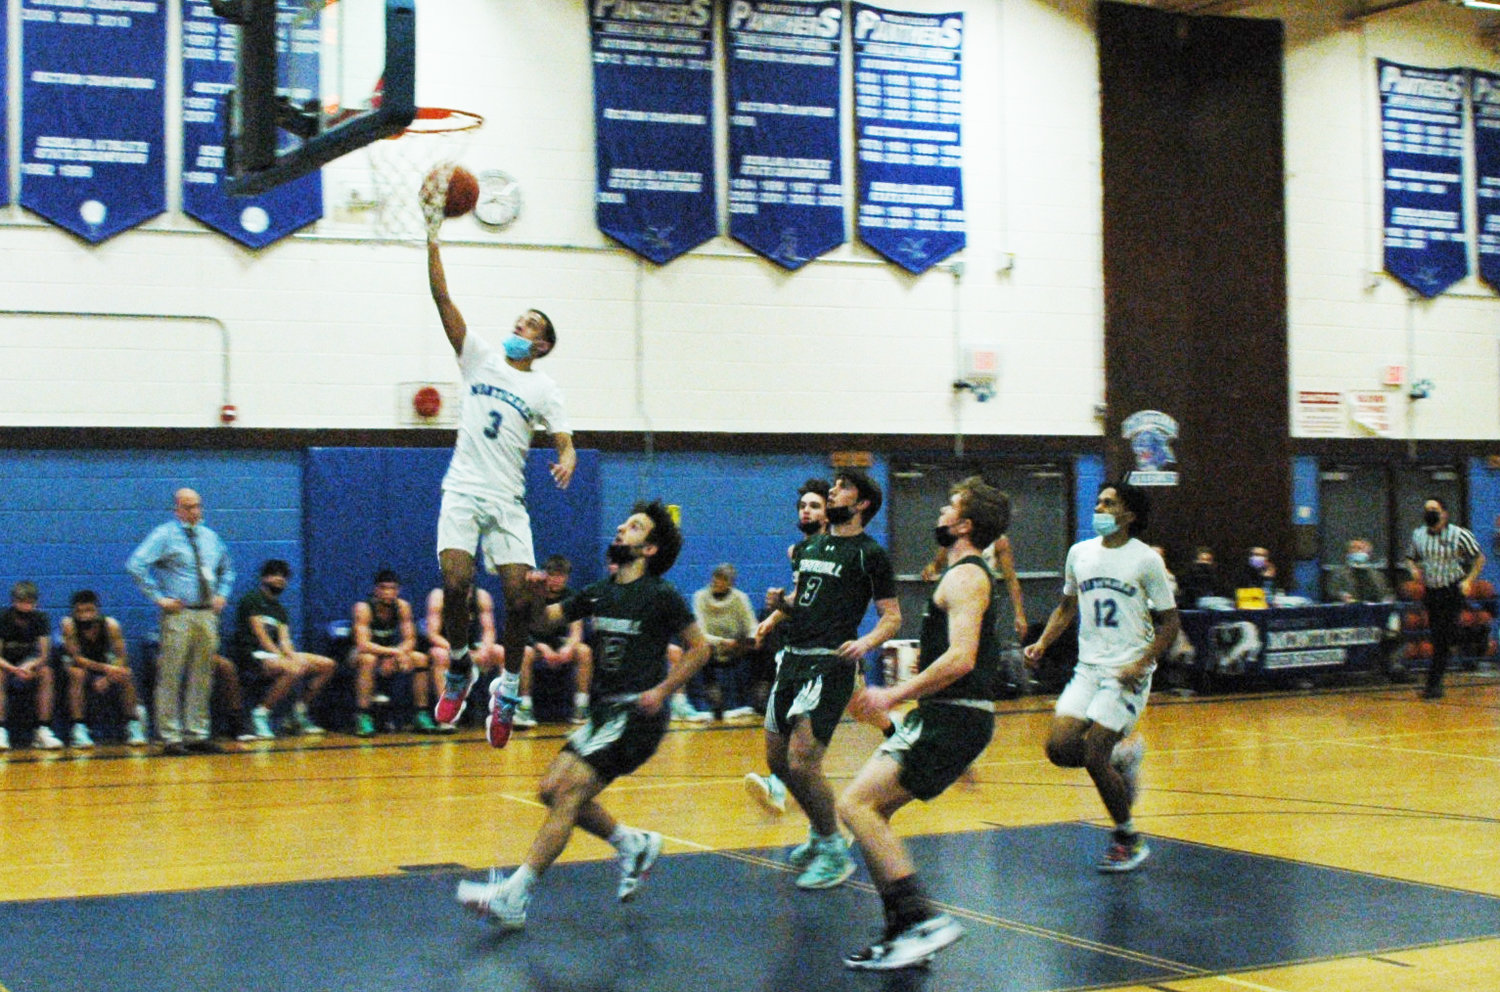 Pedro Rodriguez breaks away for a layup against Cornwall. Rodriguez had 17 points on the night, including a crucial go-ahead three-point play to secure the victory.